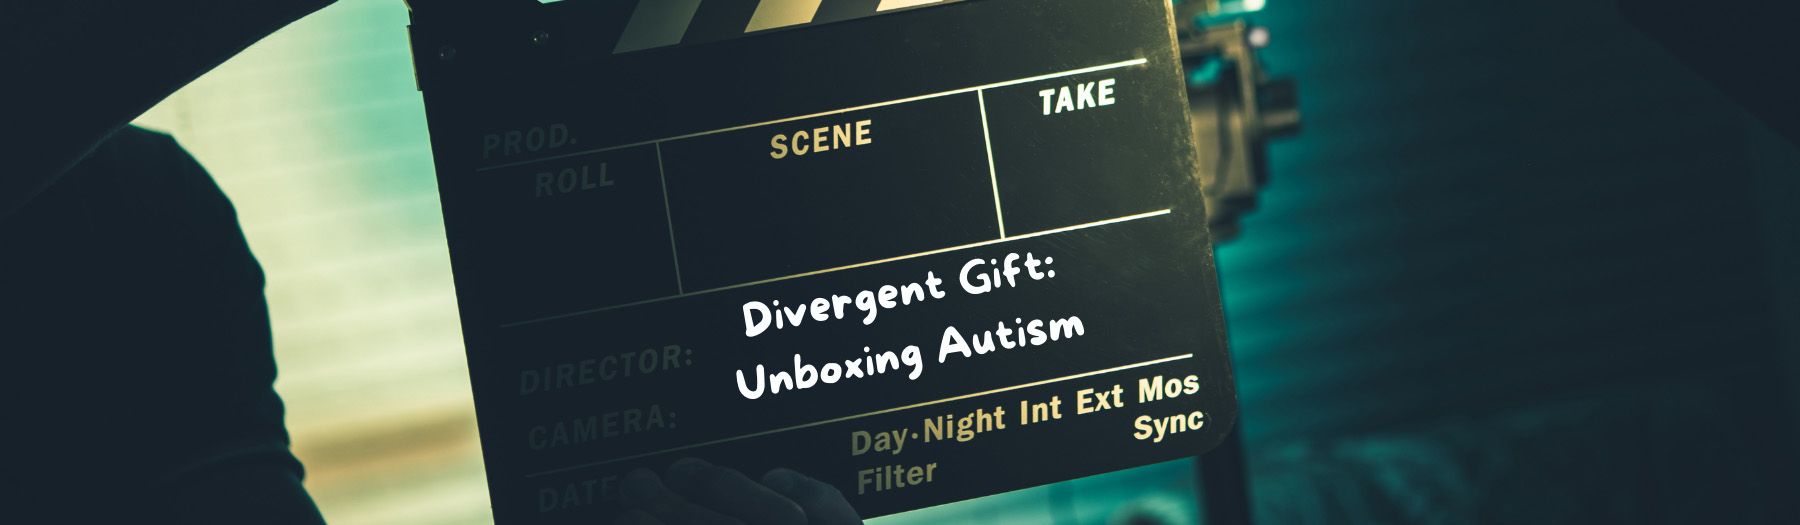 The Divergent Gift: Unboxing Autism